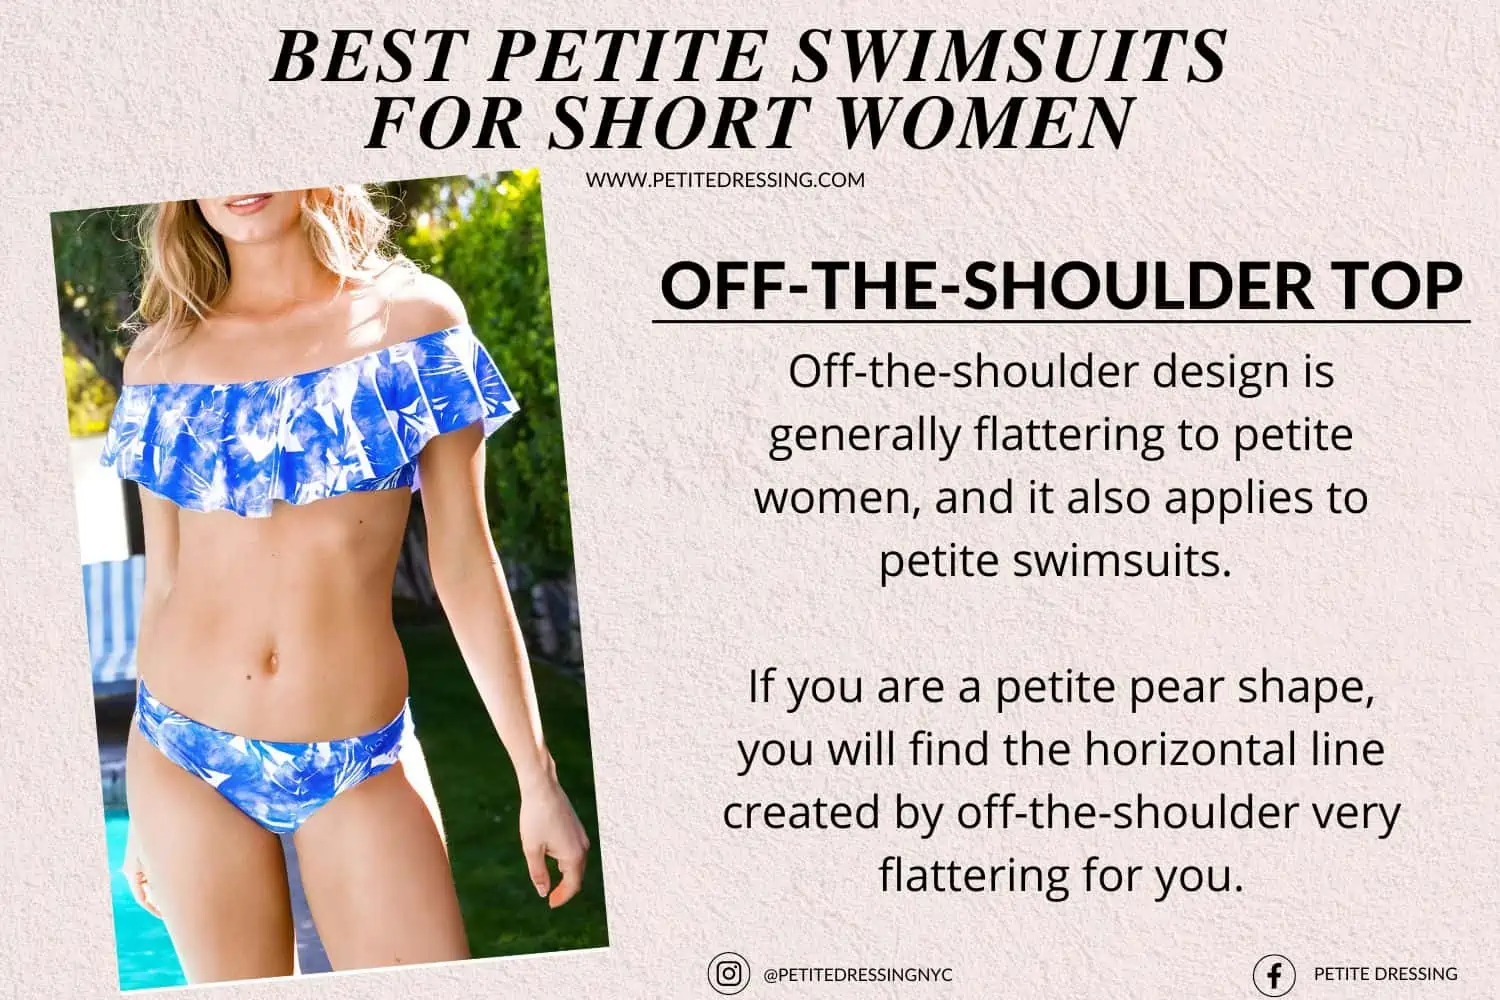 The Complete Swimsuit Guide for Short Women - Petite Dressing